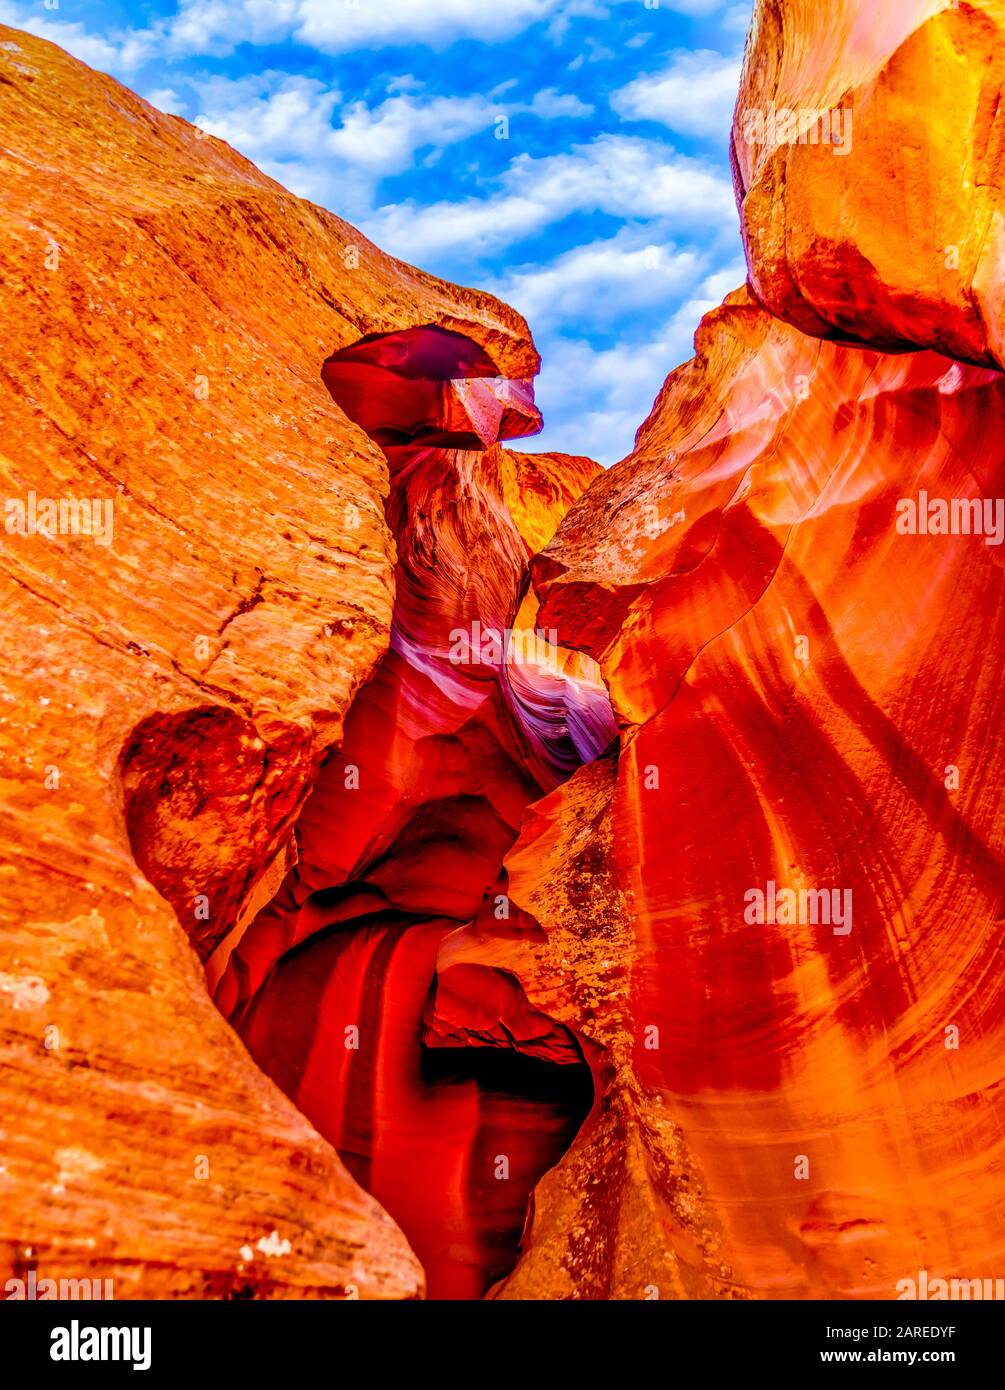 The entrance into the Upper Antelope Canyon, a famous Slot Canyon in Navajo lands near Page Arizona, United States Stock Photo